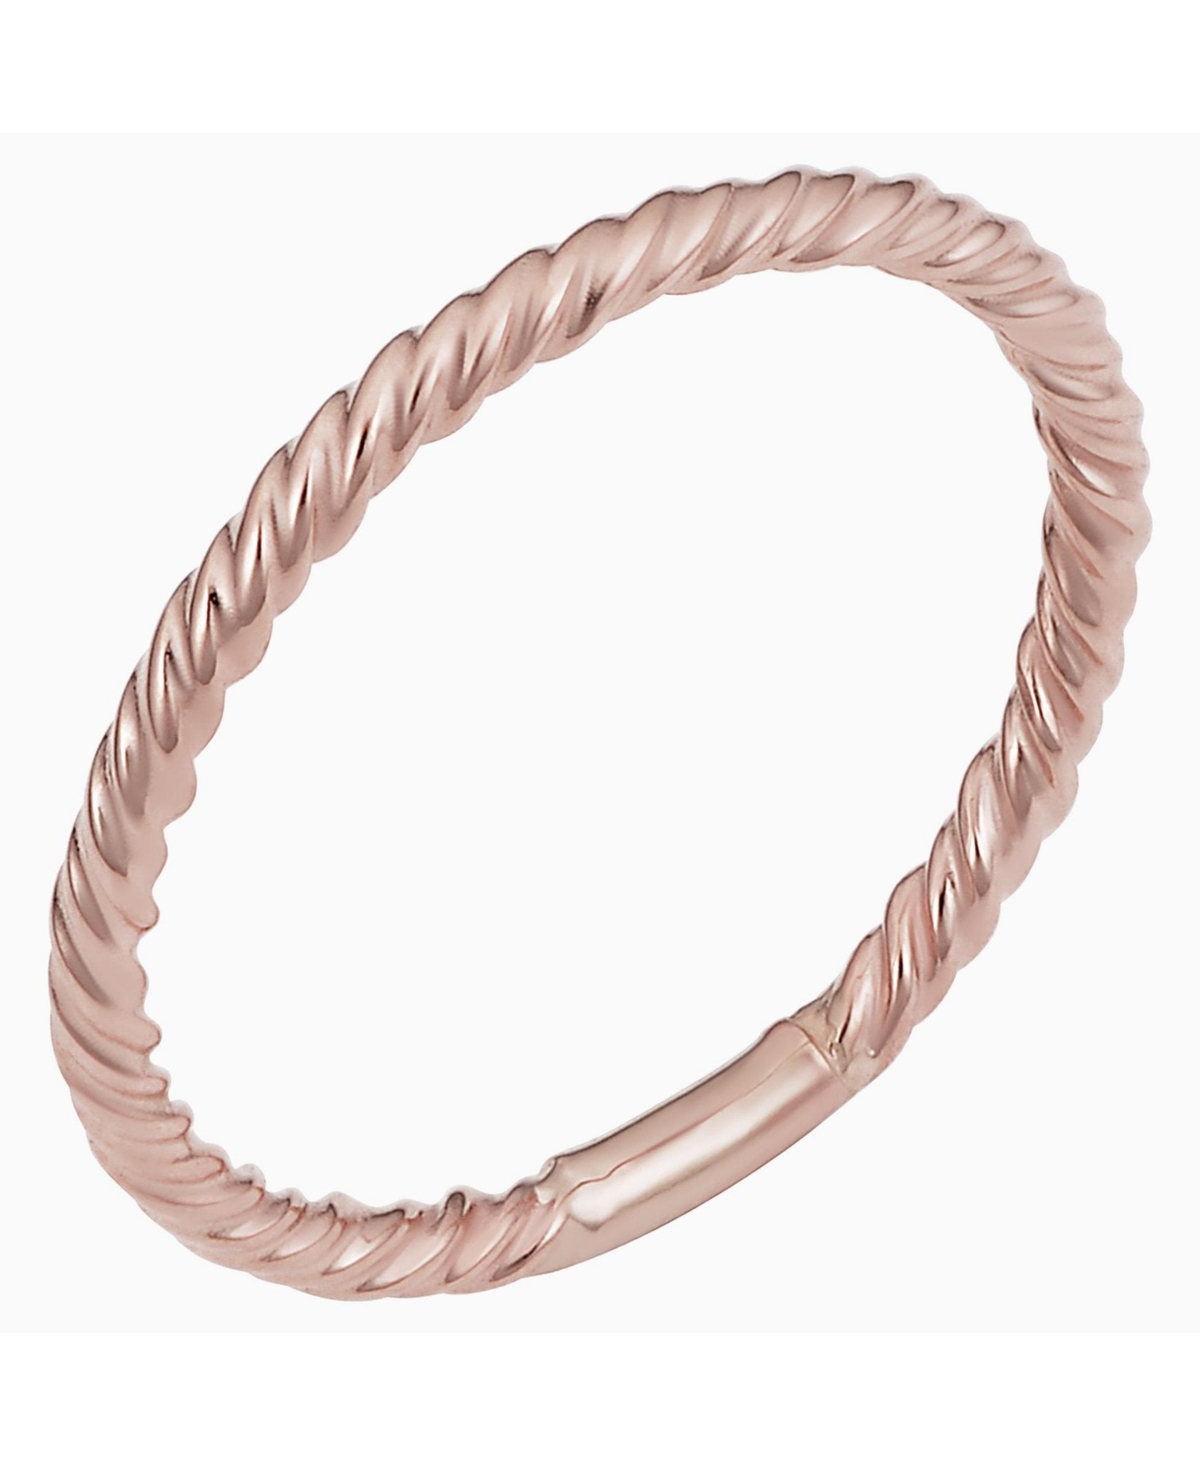 ORADINA DAWN RING IN 14K YELLOW GOLD, 14K WHITE GOLD OR 14K ROSE GOLD- 8 INCHES